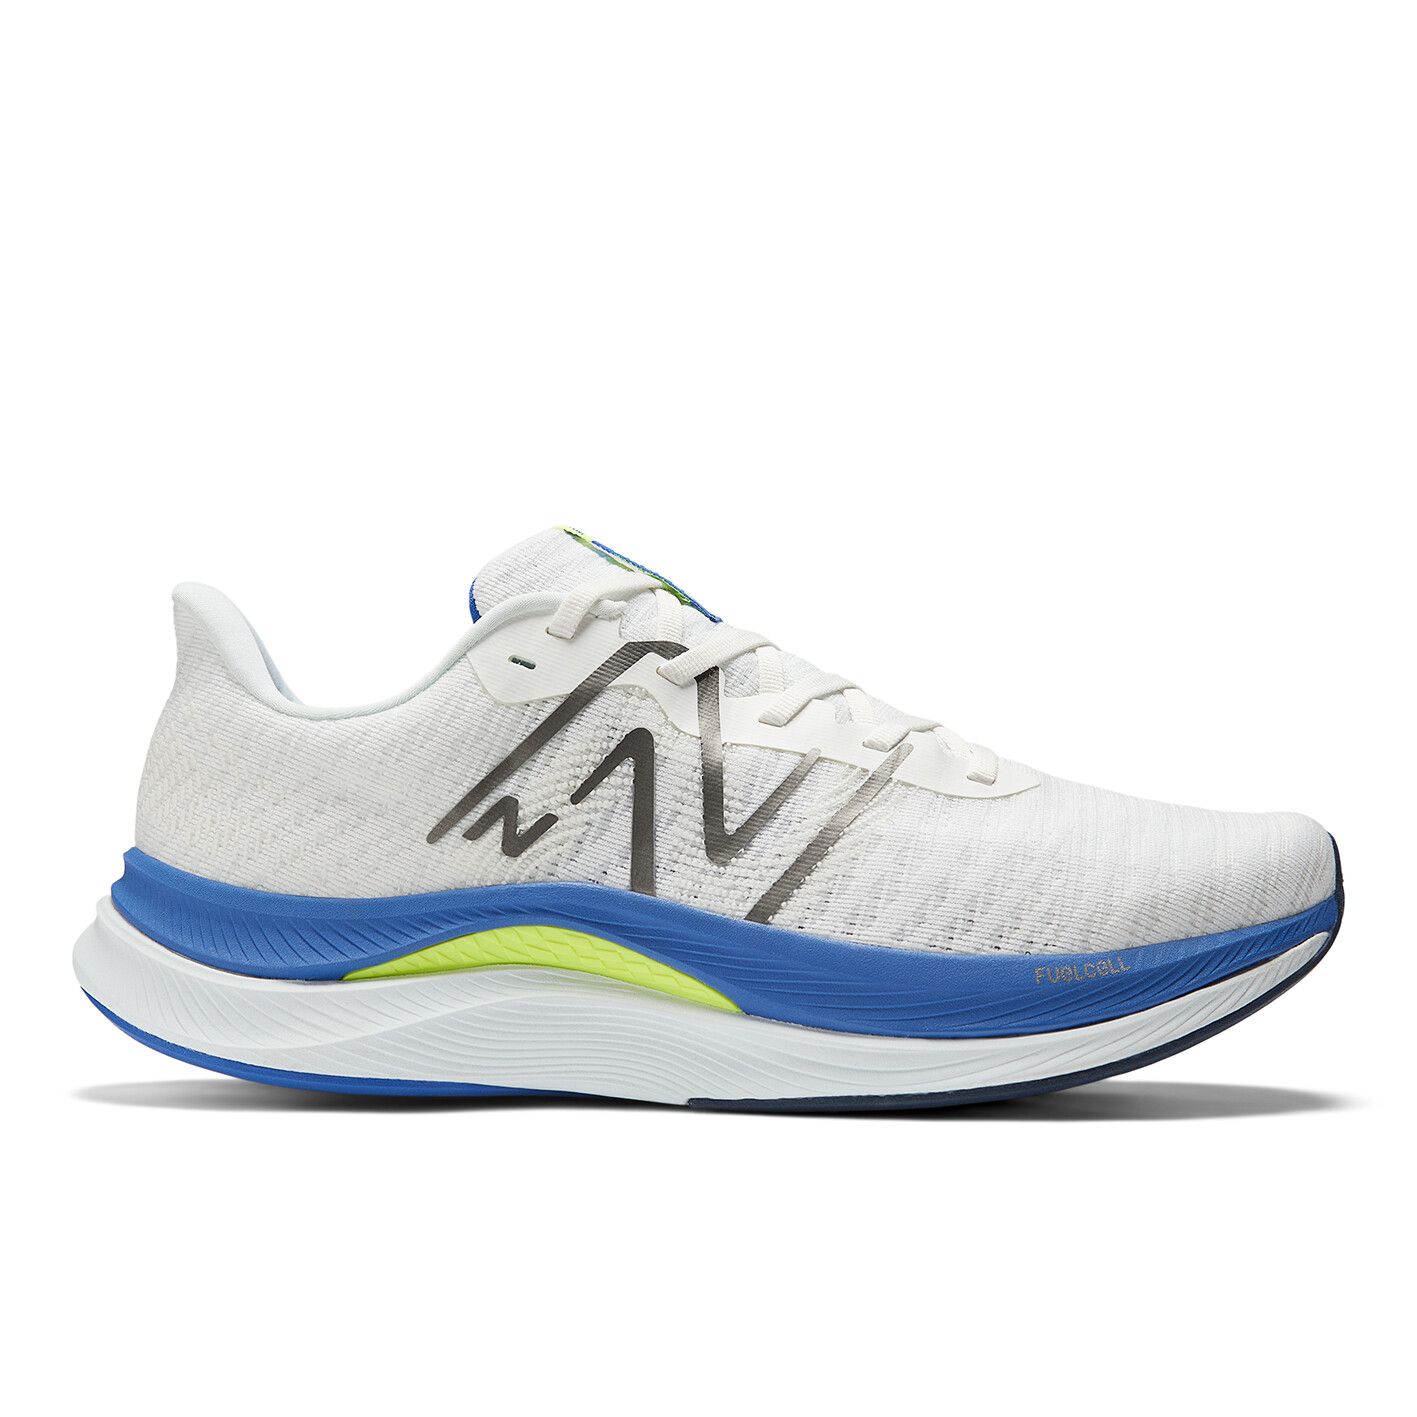 New Balance - MFCPRCW4 Fuel Cell Propel v4